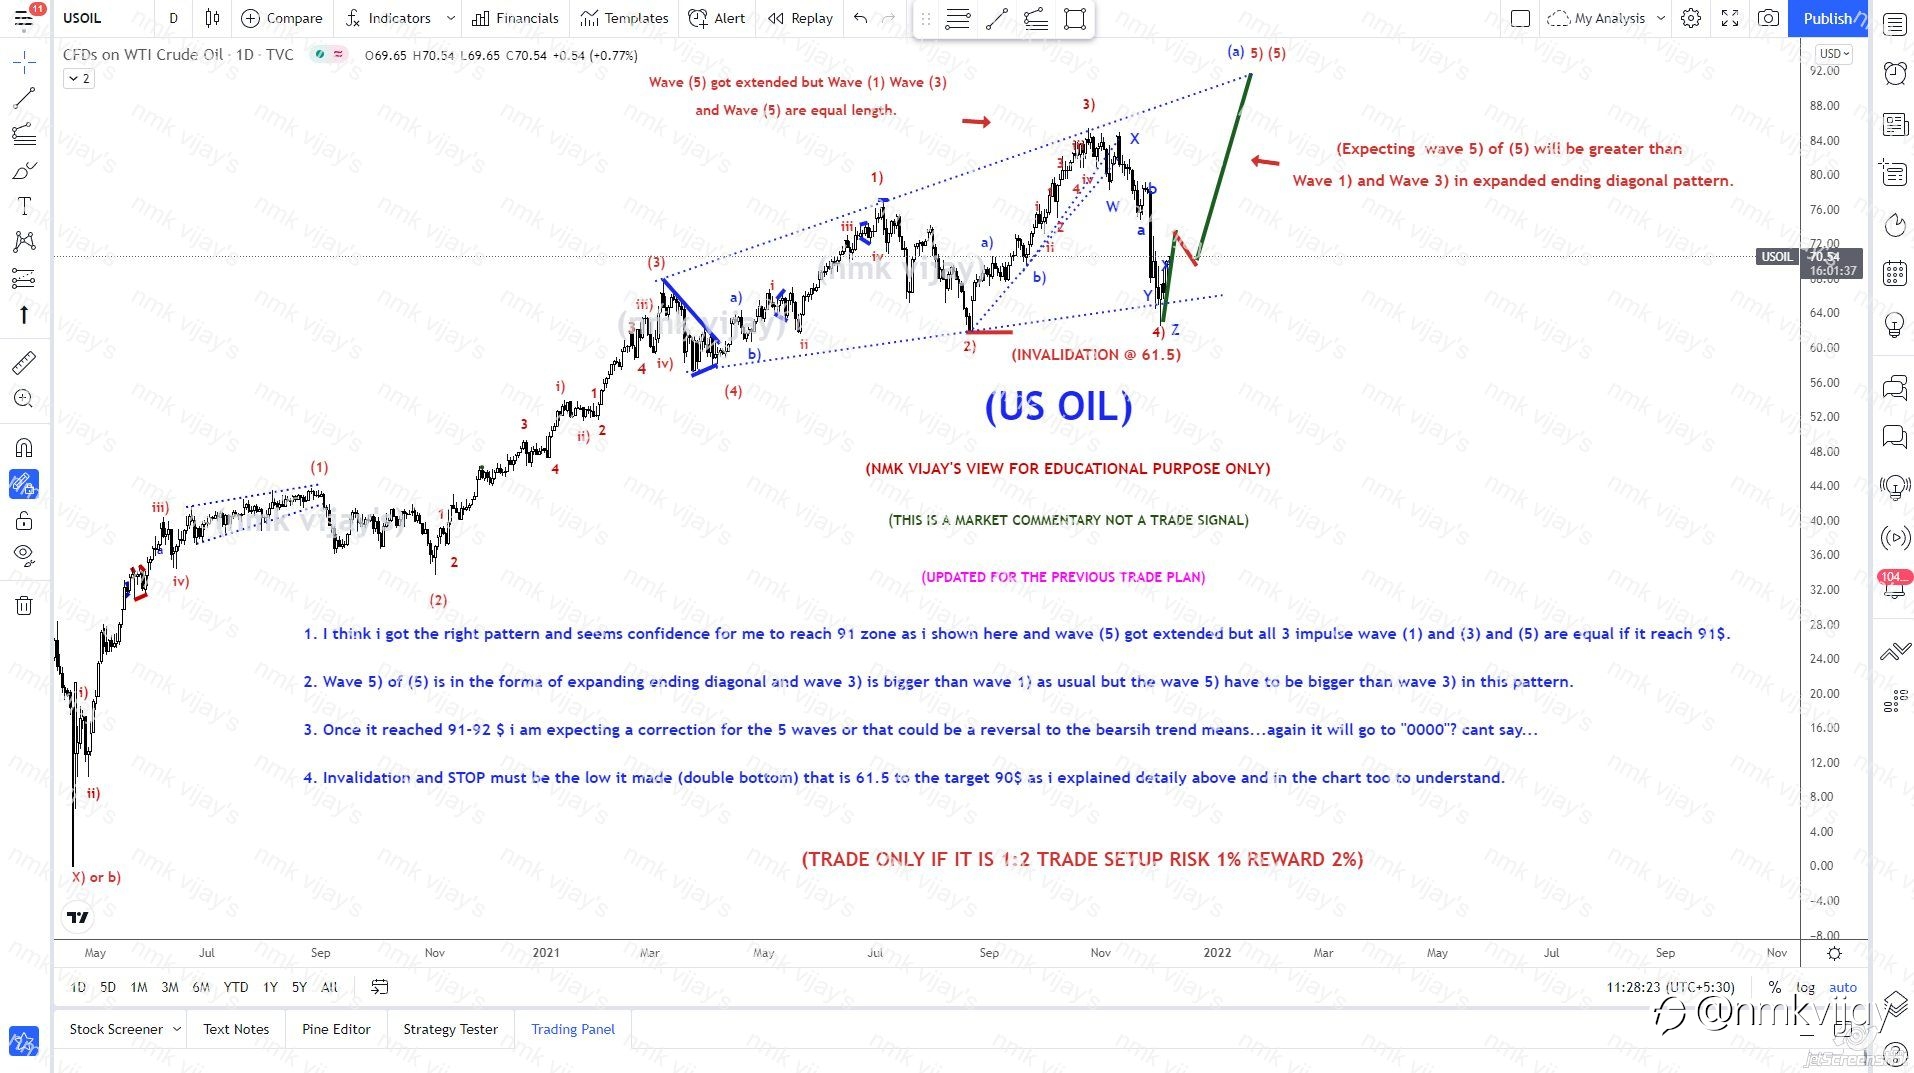 USOIL-Seems I got the right pattern here to the TARGET 90-91$ for wave (5) to complete !